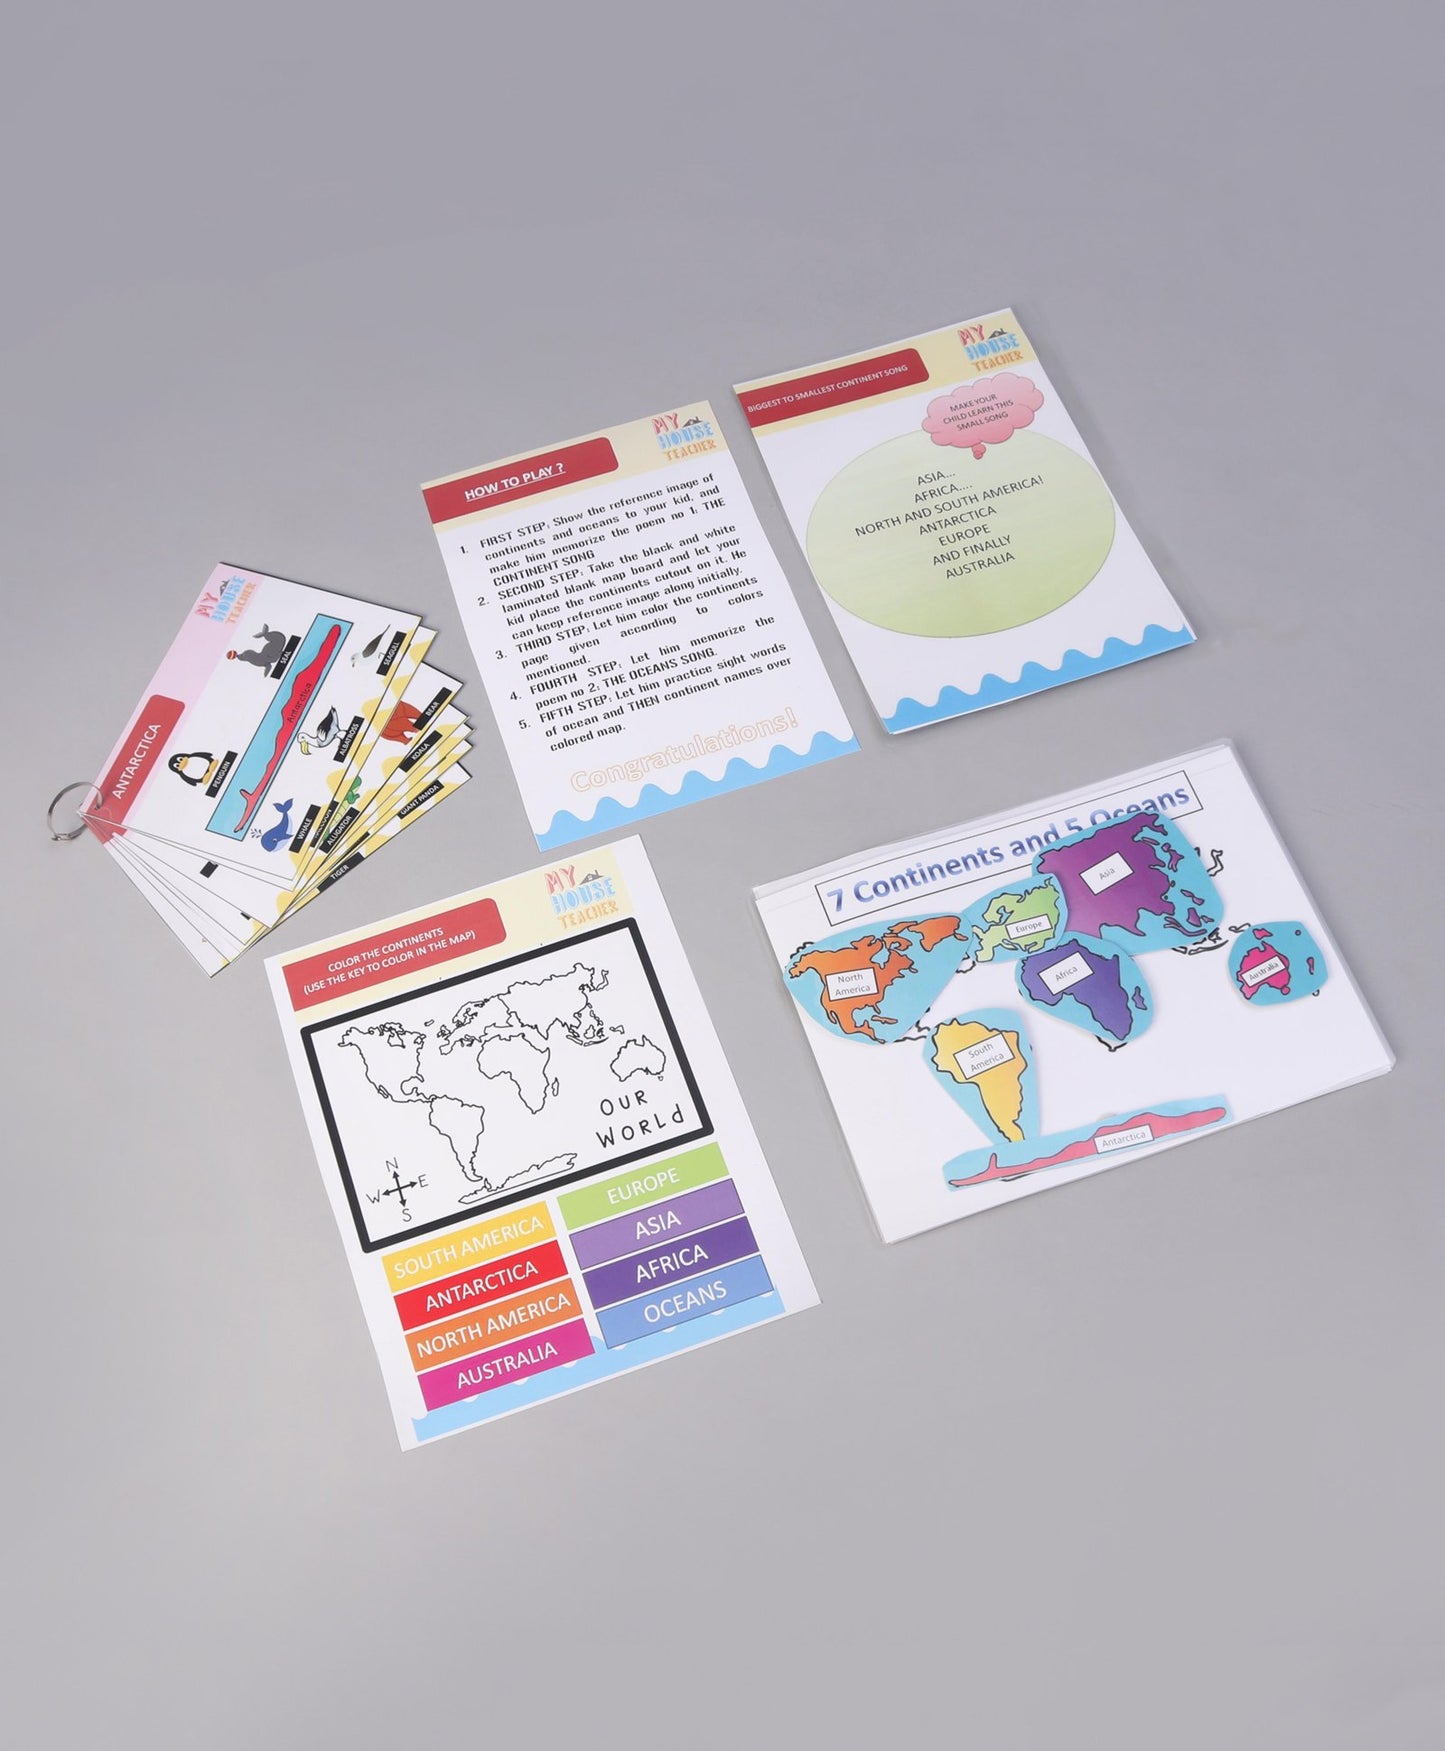 Continents and Oceans Fun Learning Activity Pack